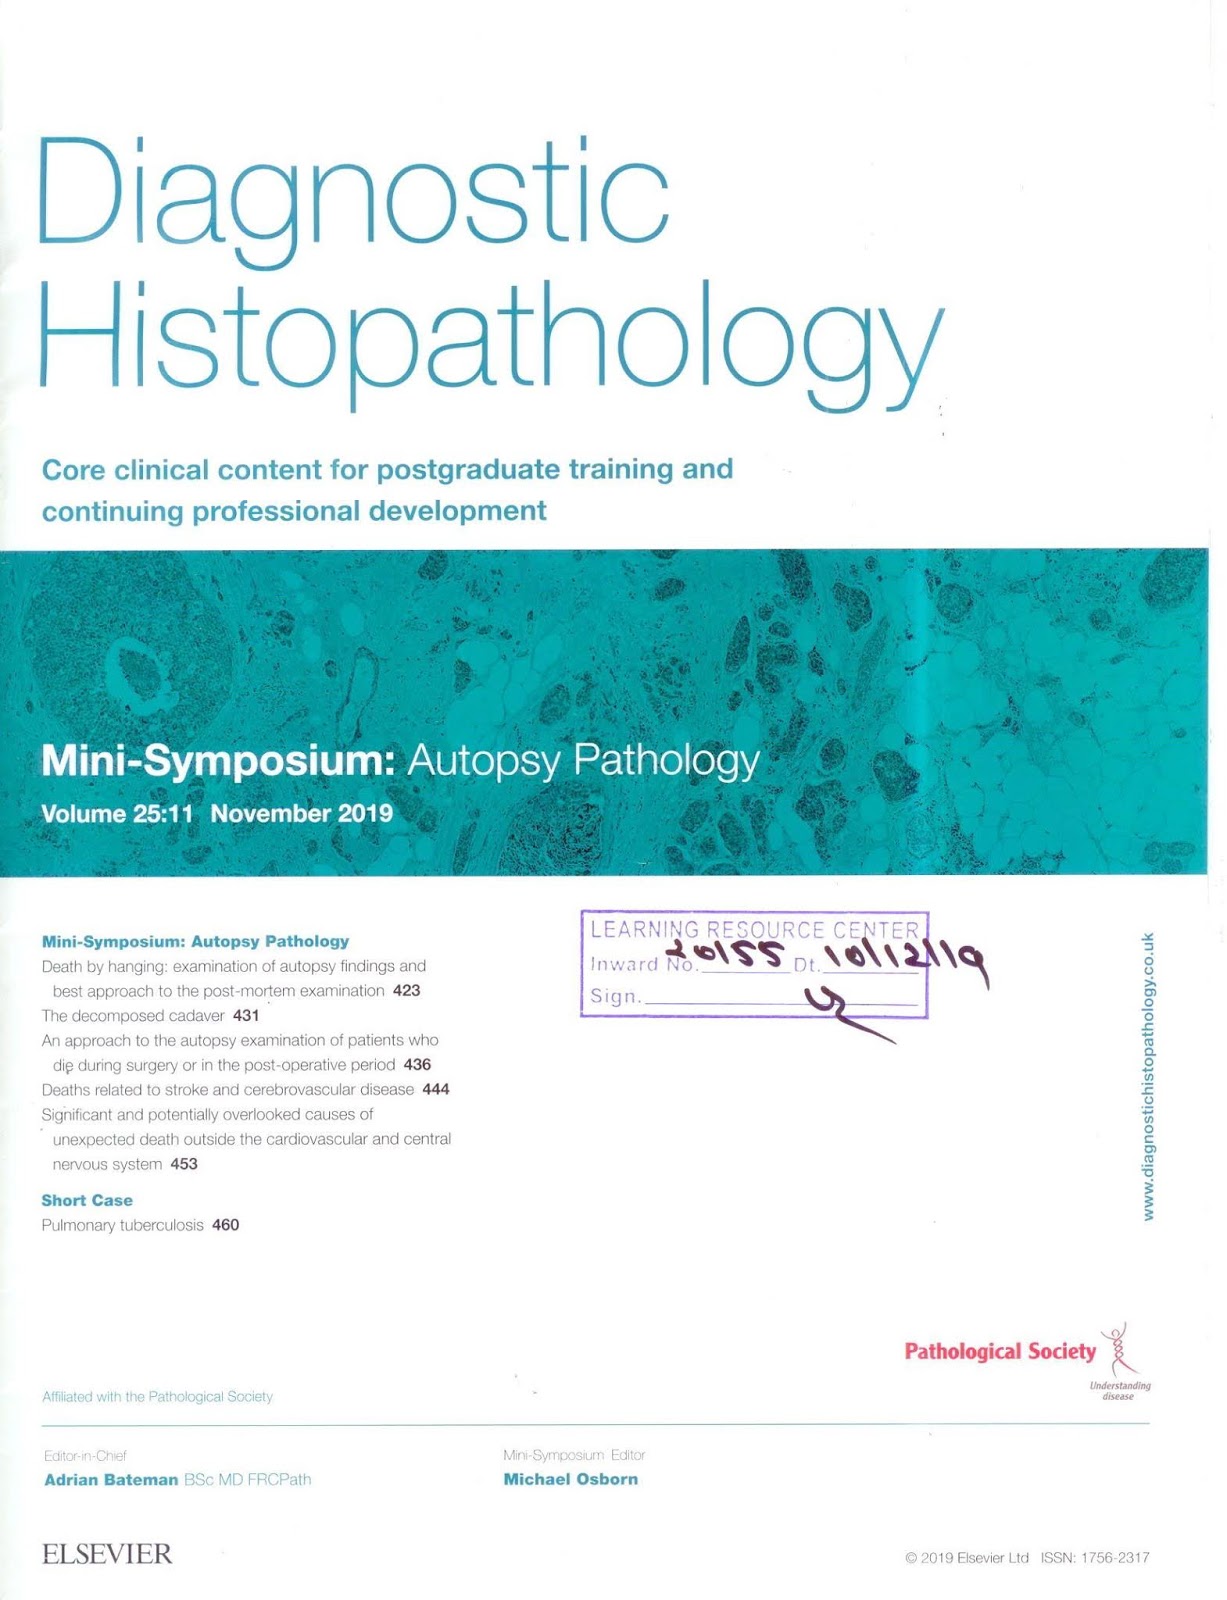 https://www.sciencedirect.com/journal/diagnostic-histopathology/vol/25/issue/11